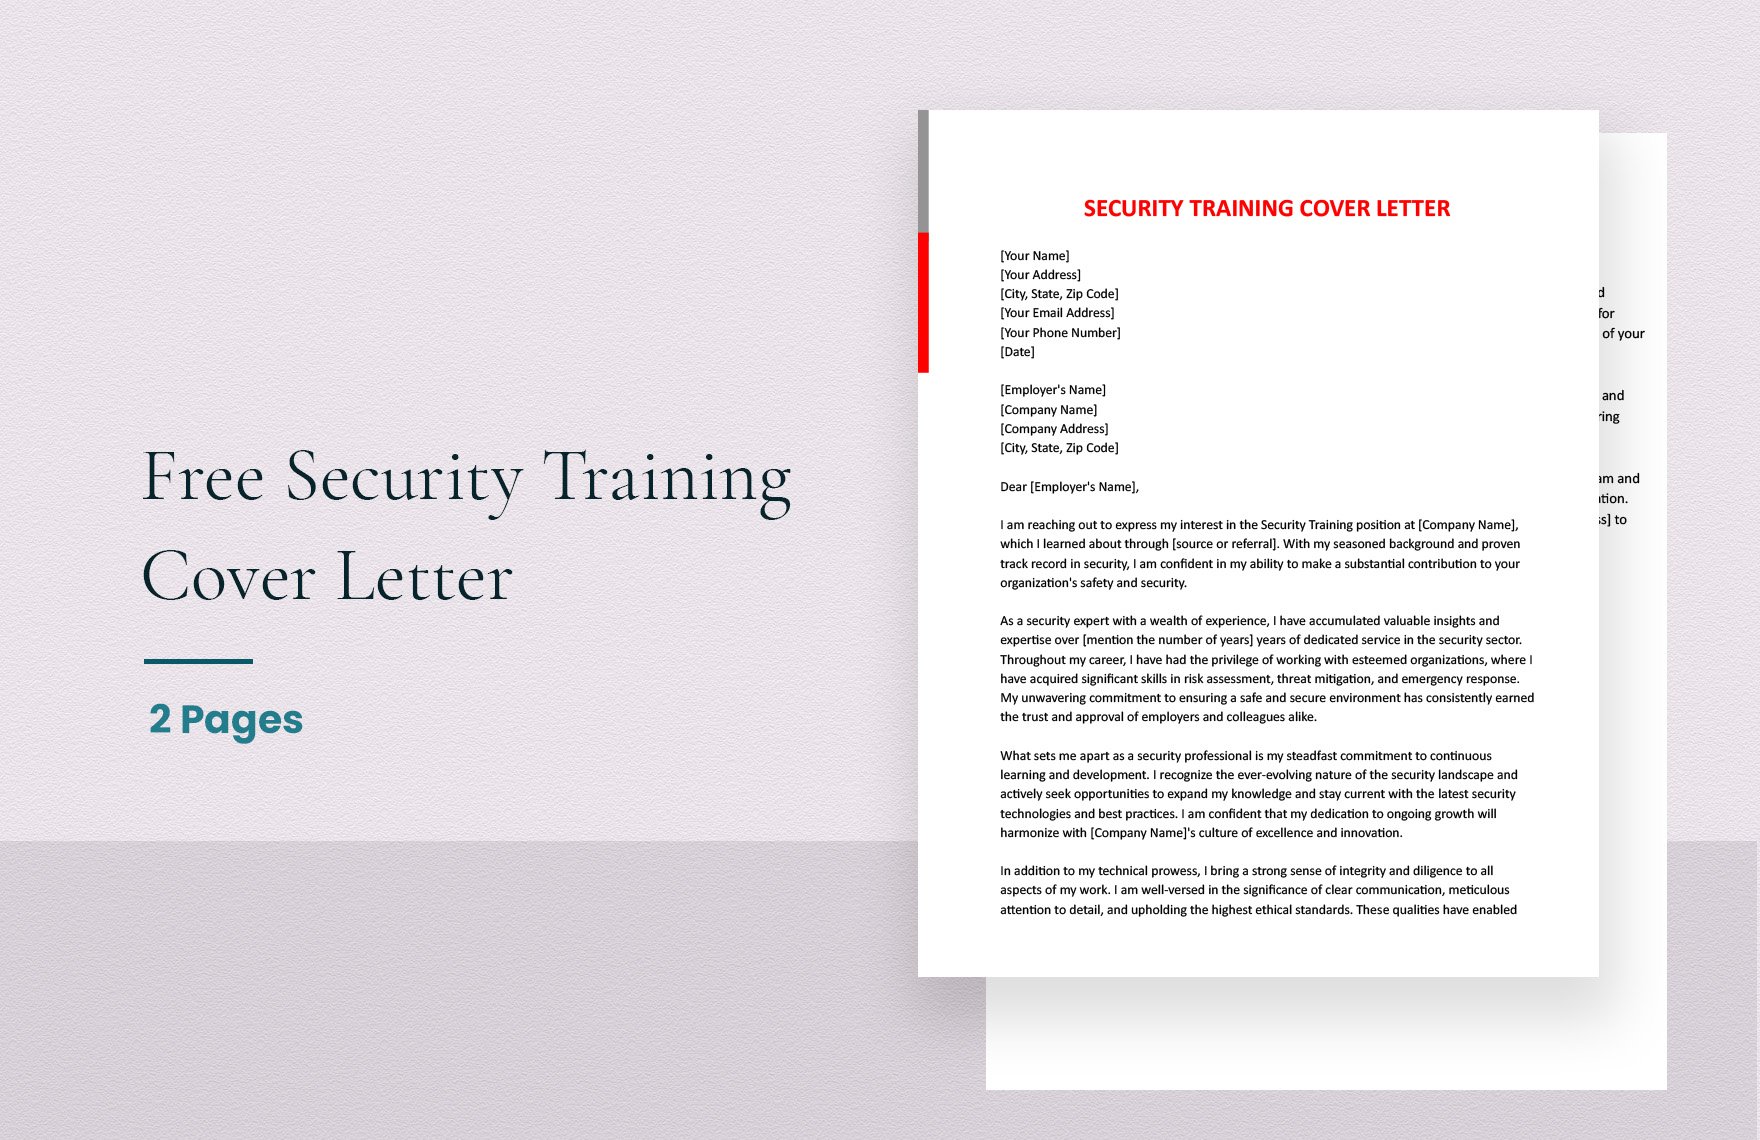 Security Training Cover Letter in Word, Google Docs